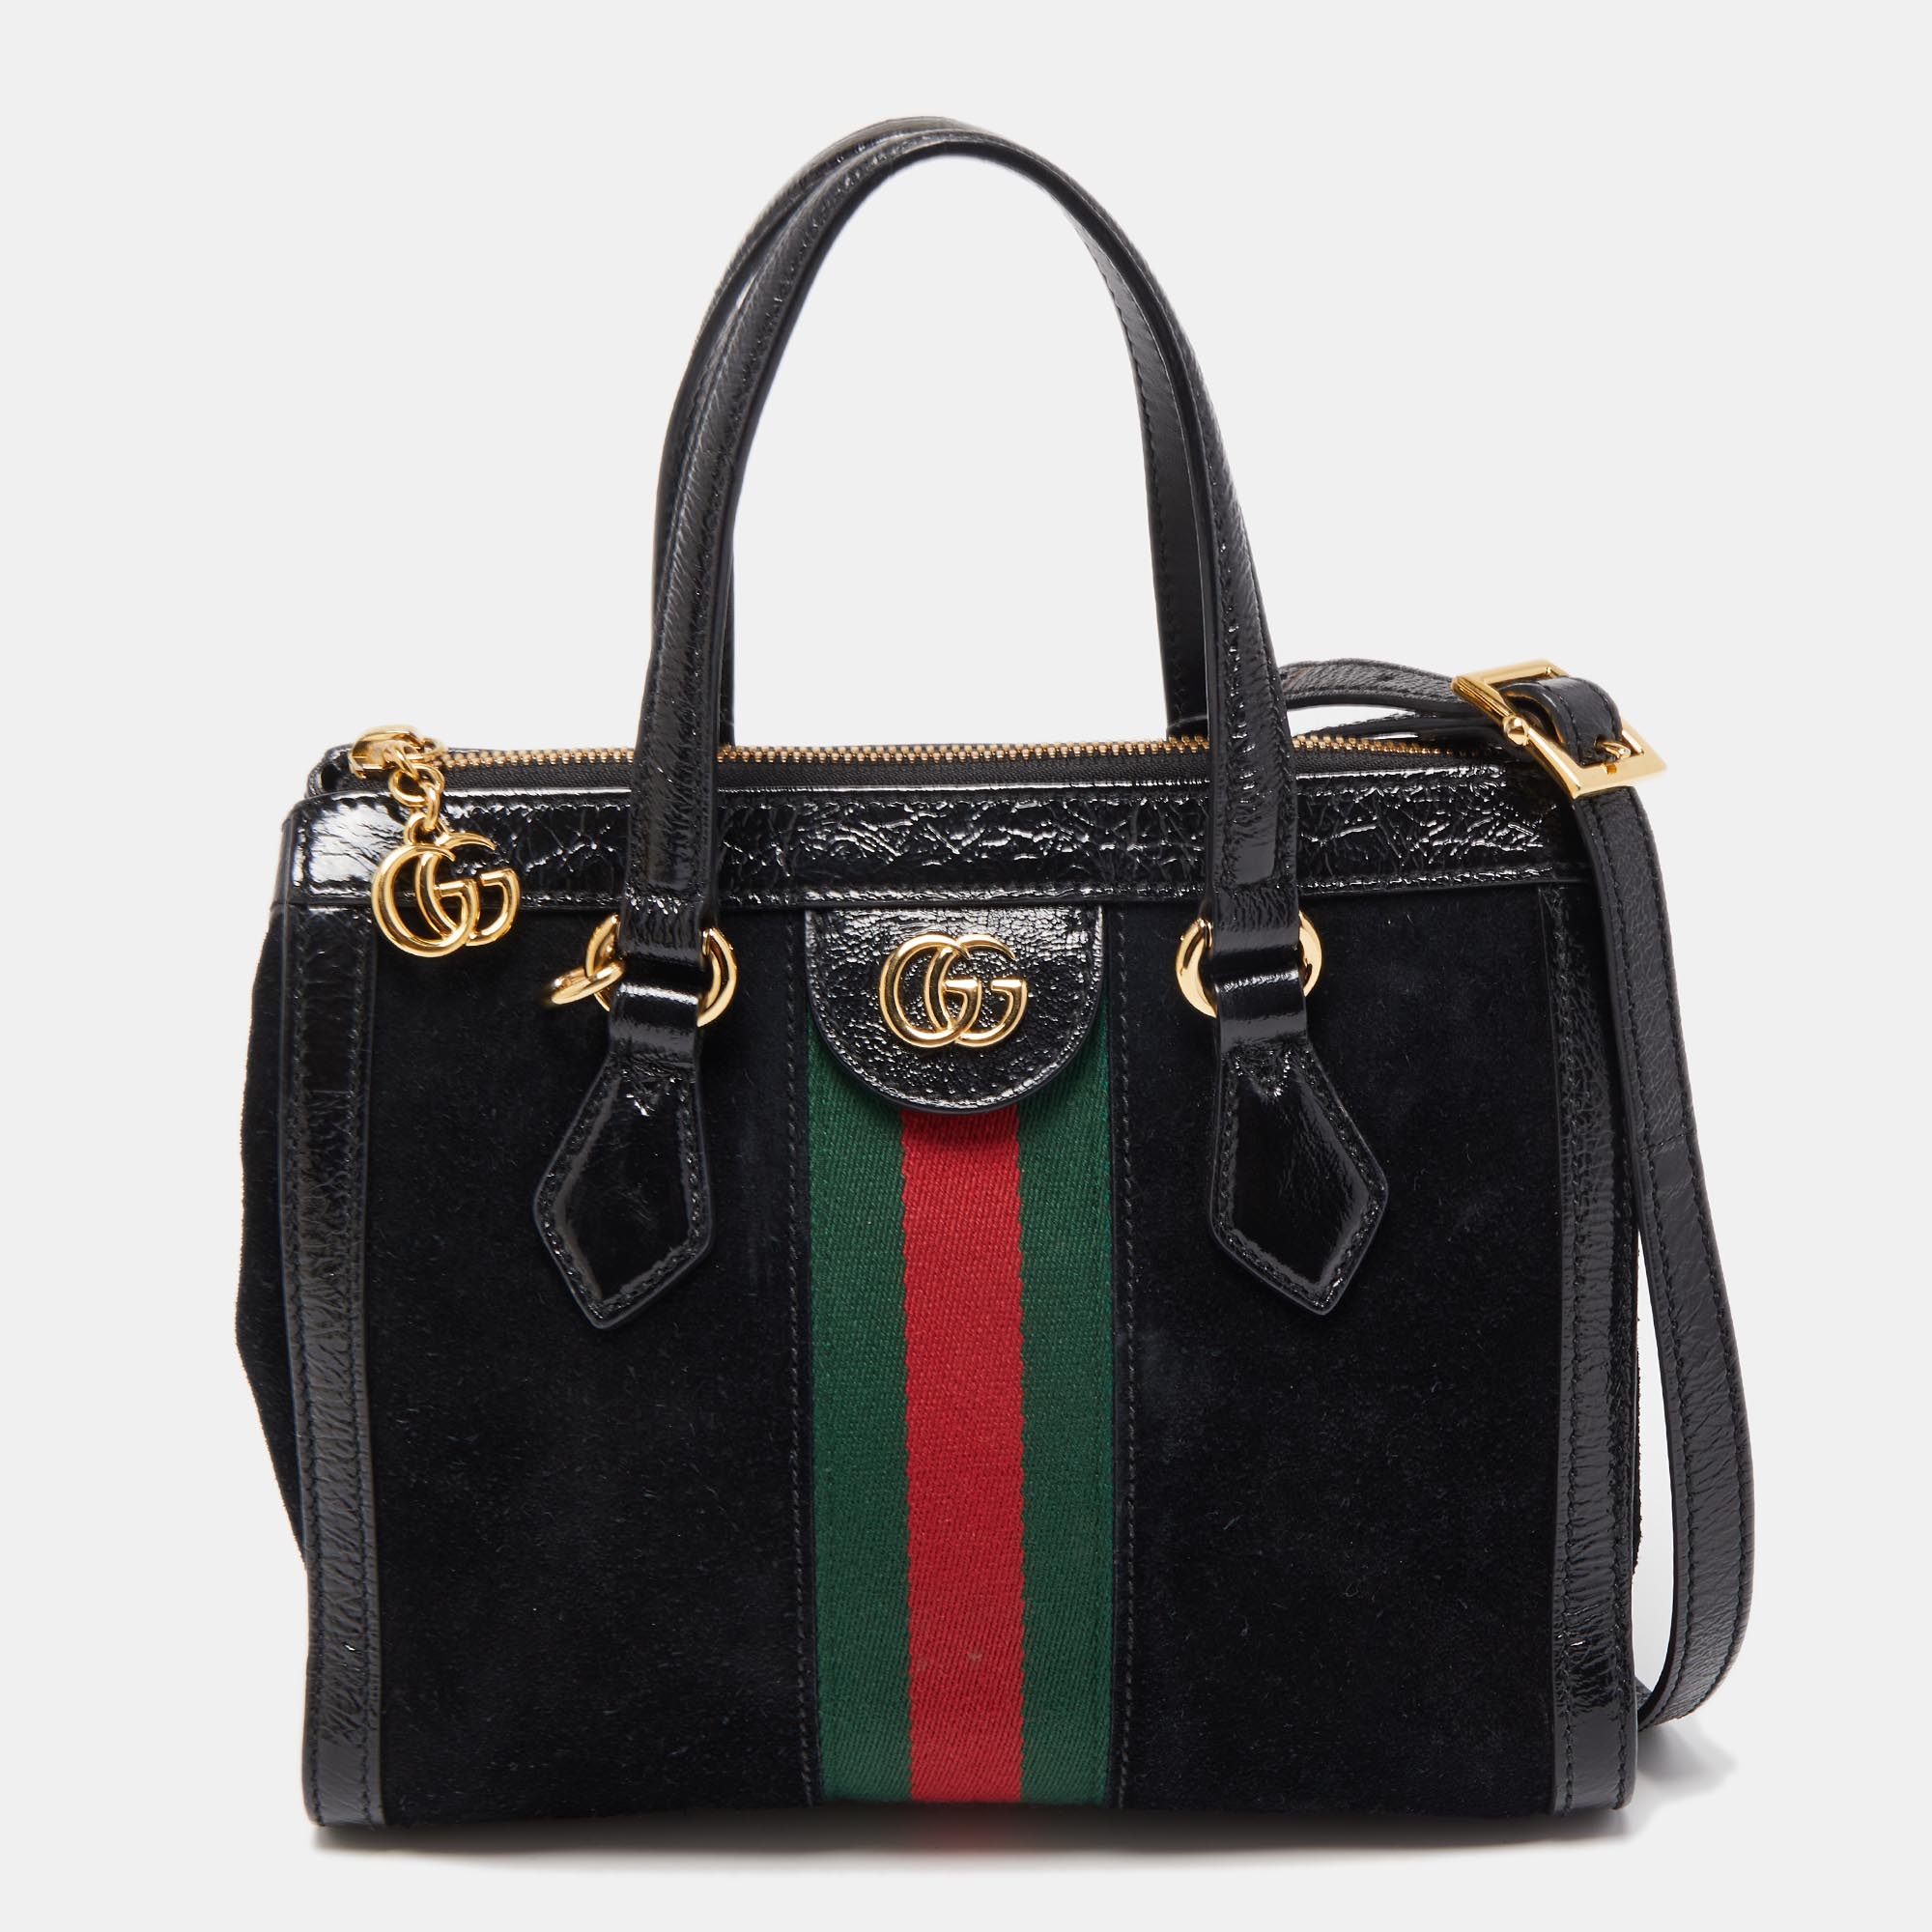 Gucci black suede and patent leather small web ophidia tote